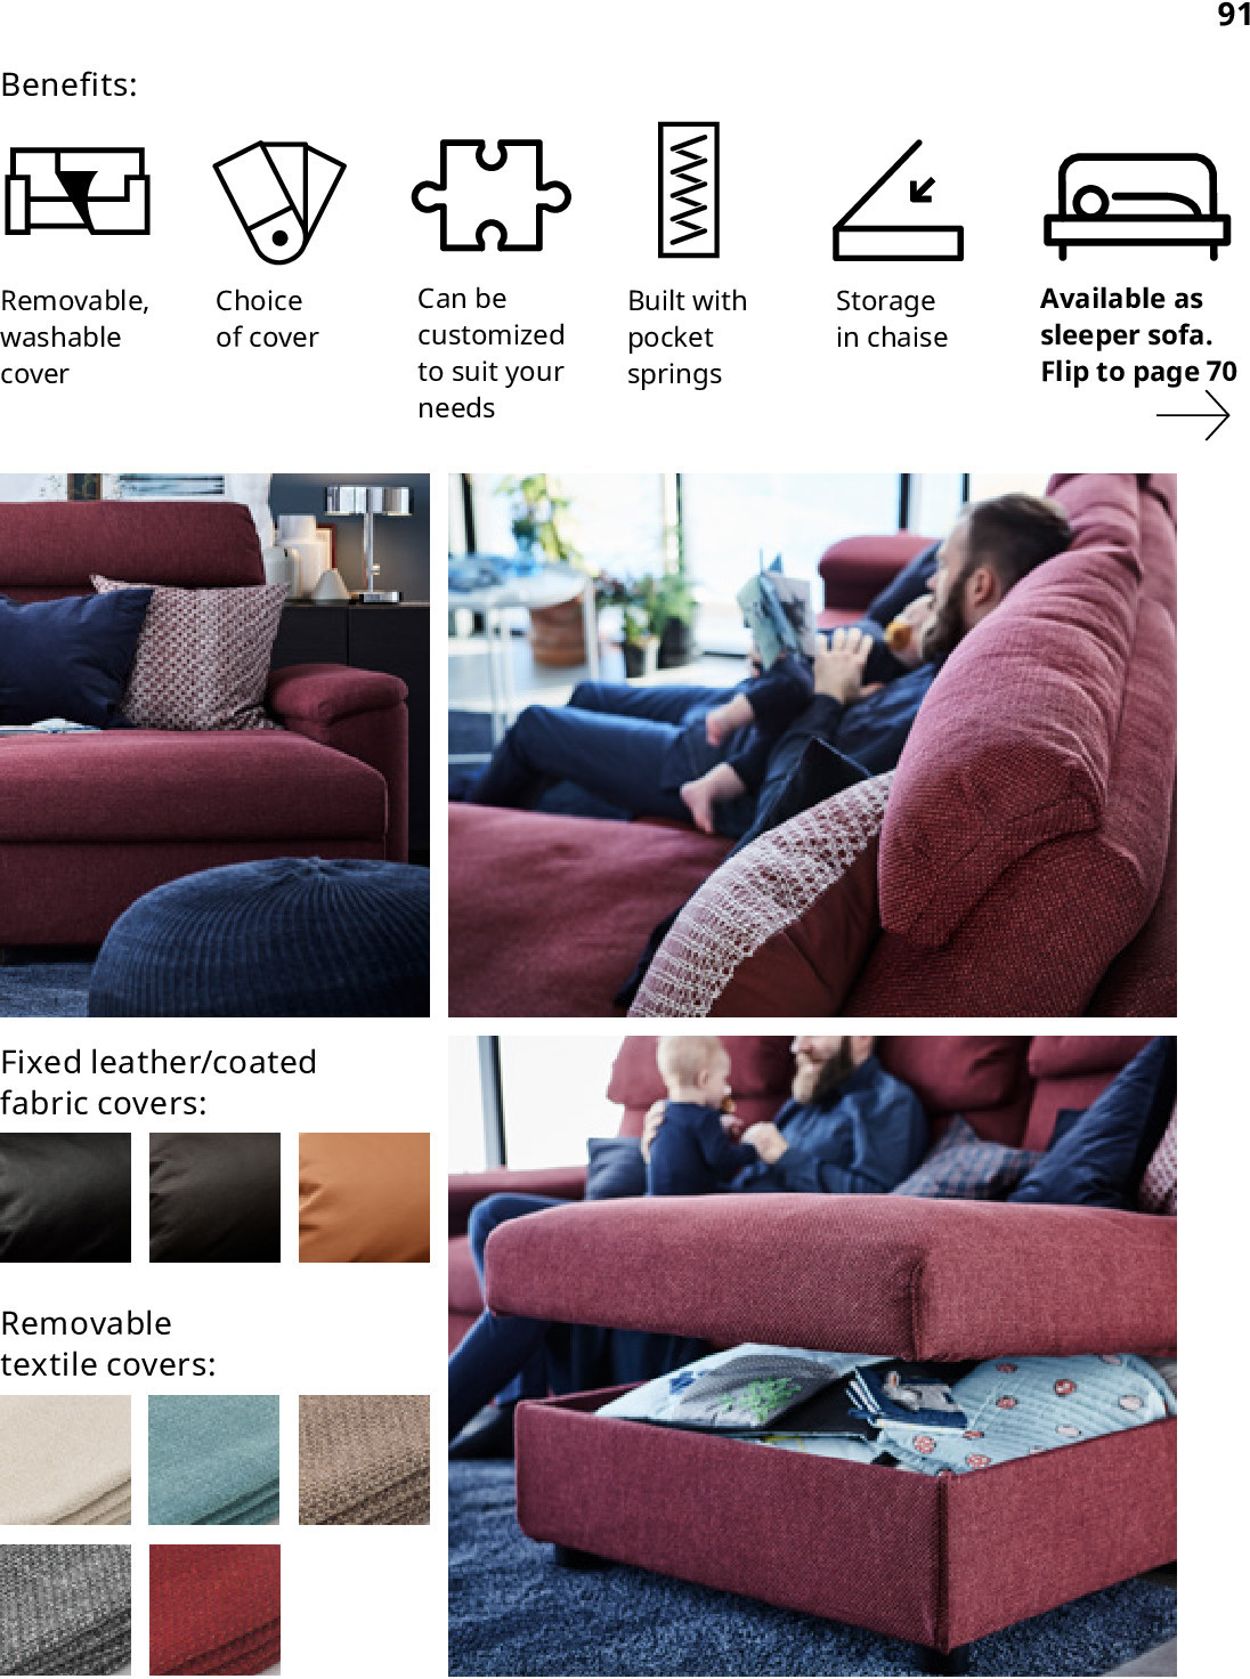 IKEA Current weekly ad 07/01 - 03/31/2022 [91] - frequent-ads.com